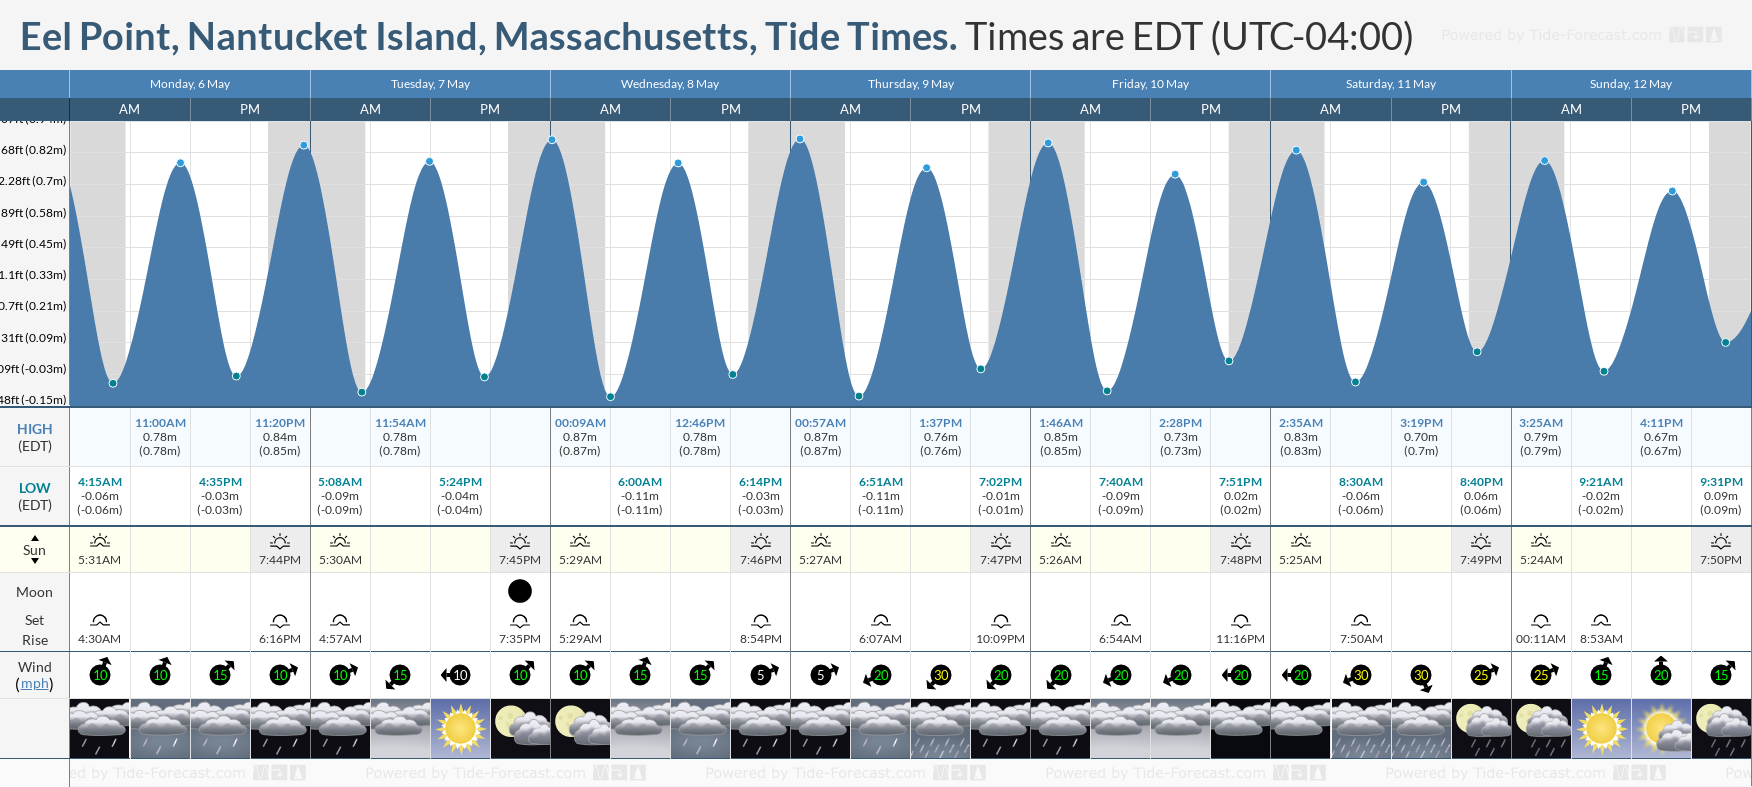 Eel Point, Nantucket Island, Massachusetts Tide Chart including high and low tide tide times for the next 7 days